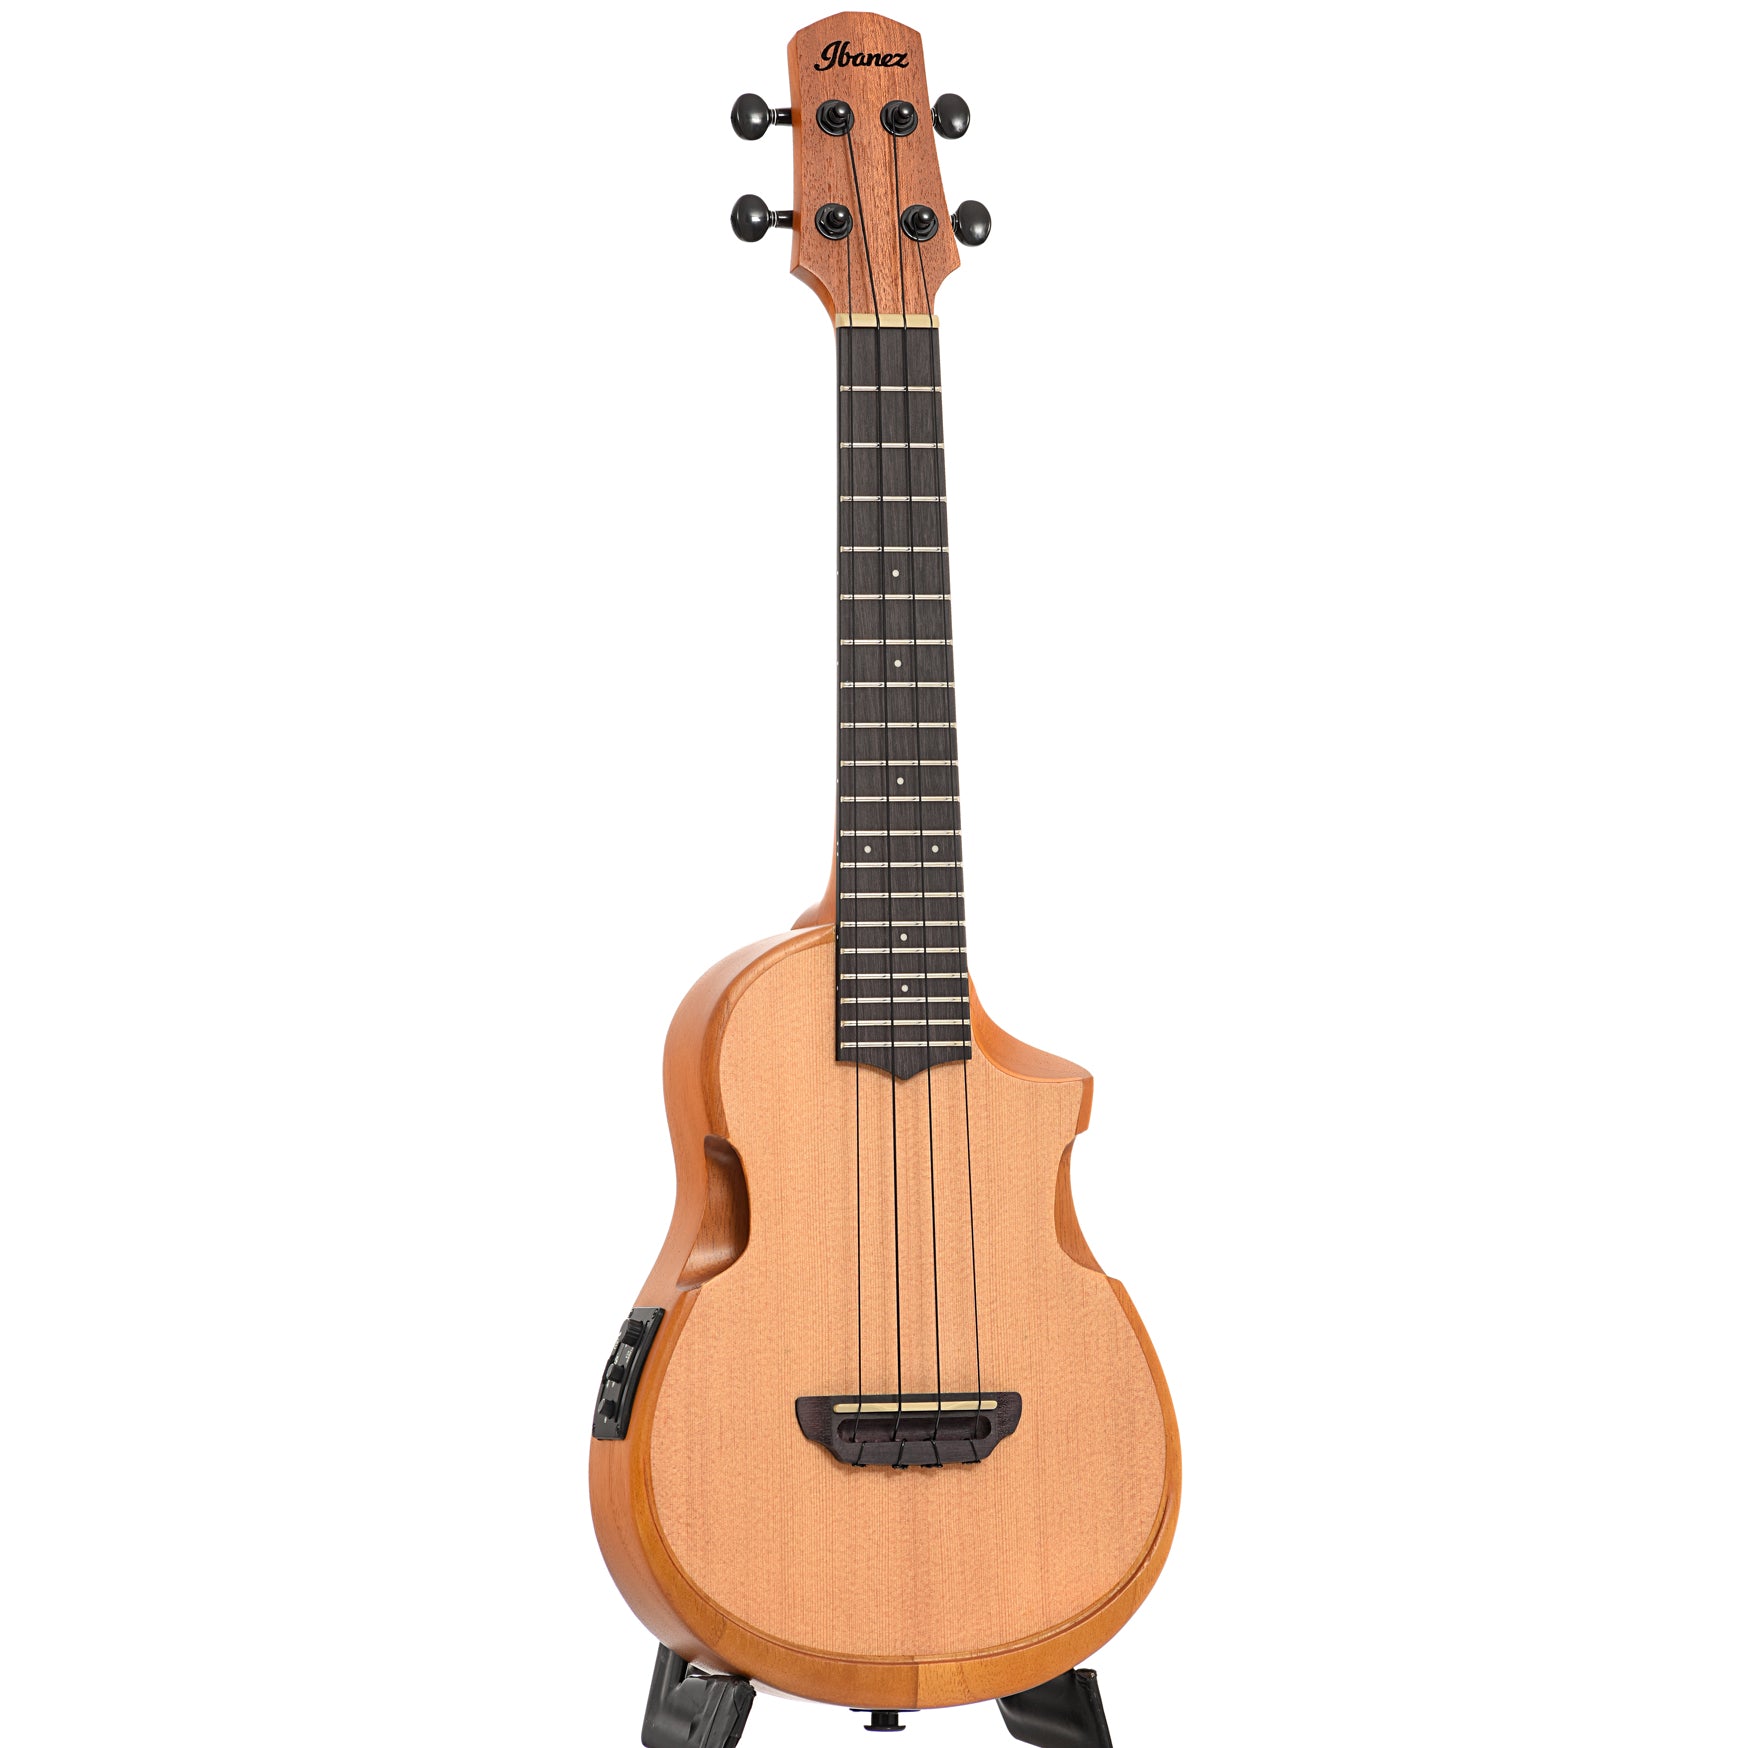 Full front and side of Ibanez AUC10E Acoustic-Electric Concert Ukulele